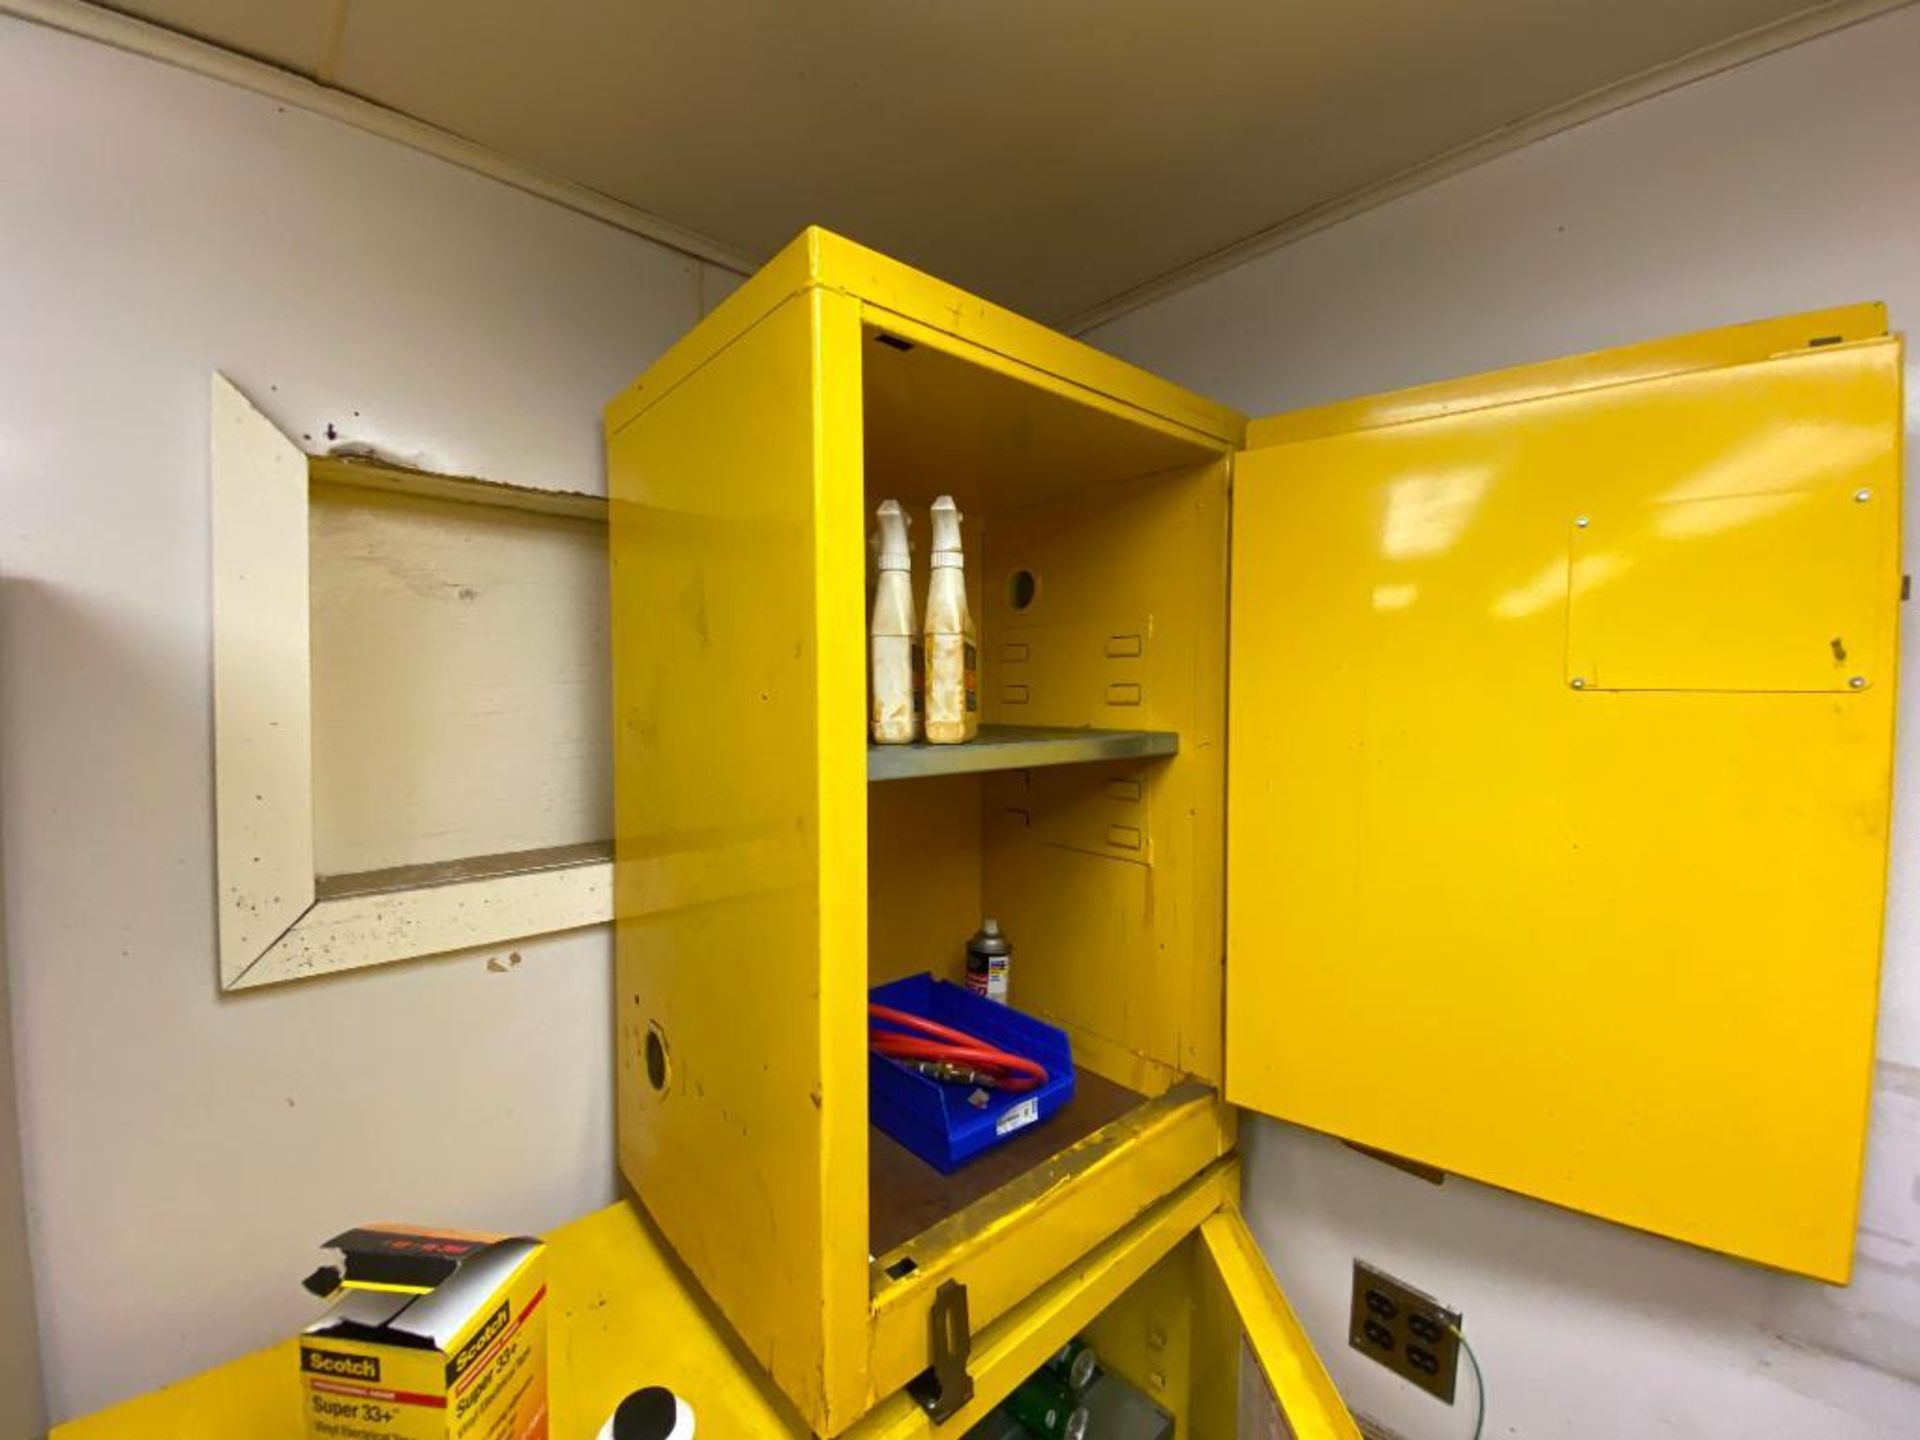 contents of supply room, JustRite flammable storage cabinets, SPX pump, assorted bits, Cryospray, in - Image 25 of 31